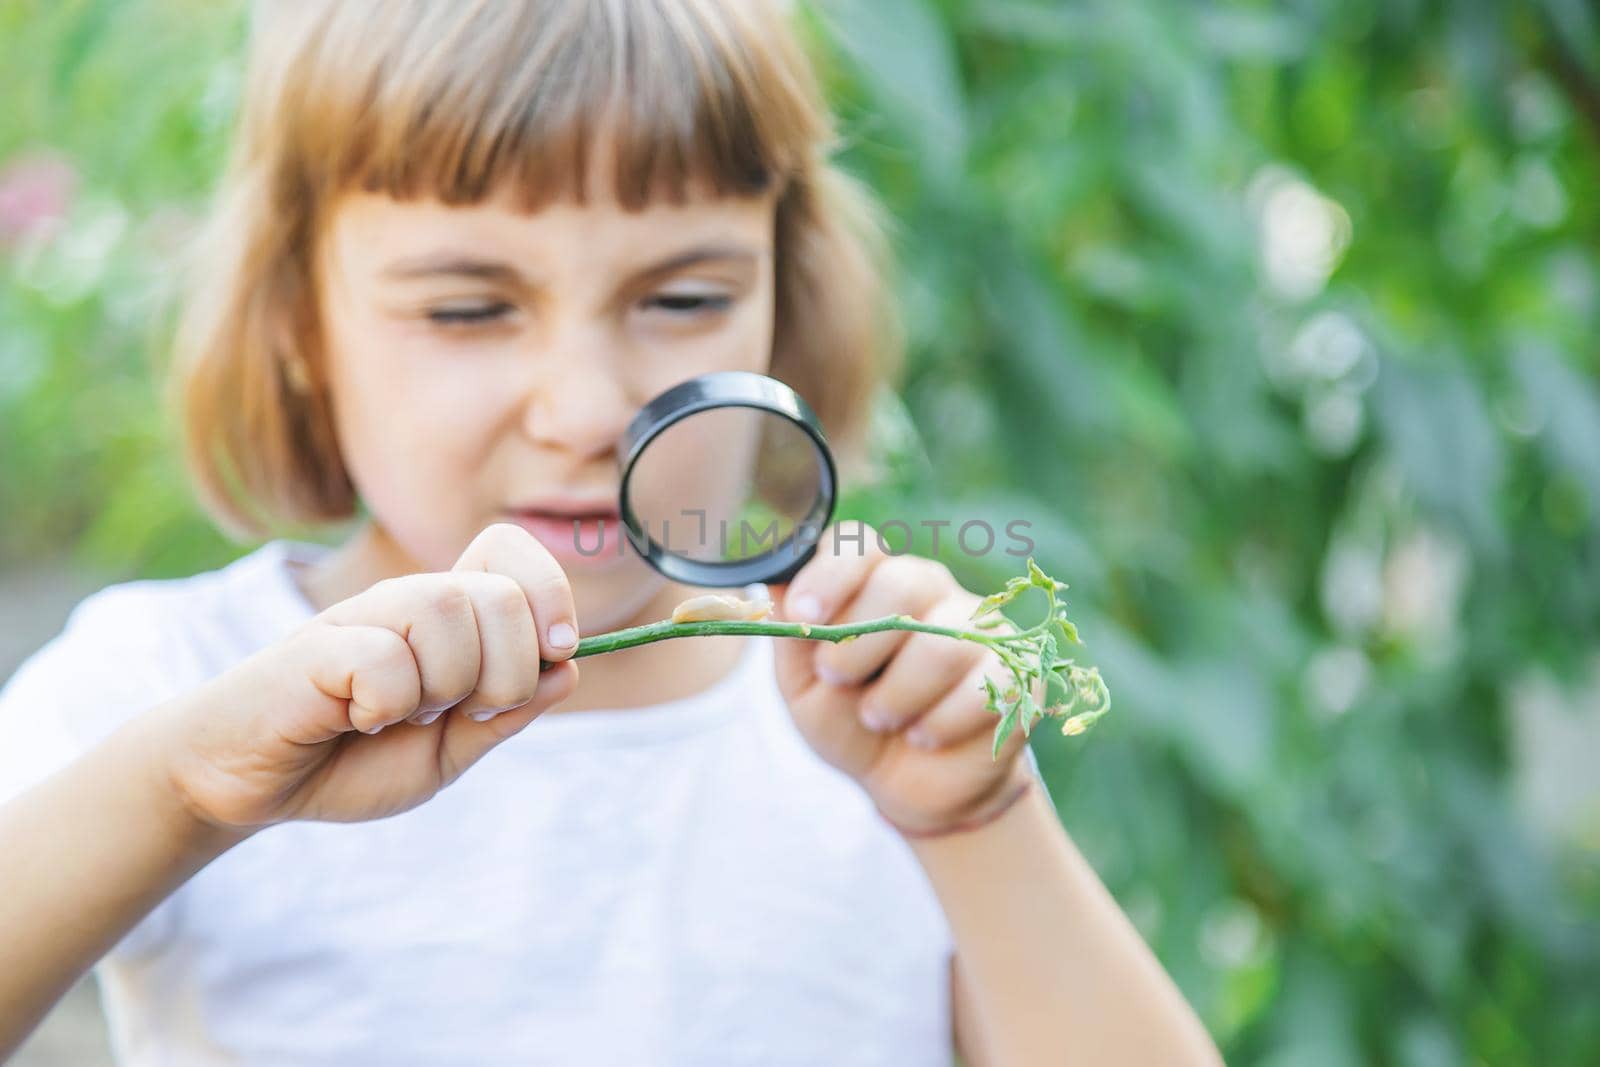 Child with a magnifying glass in his hands. Selective focus.